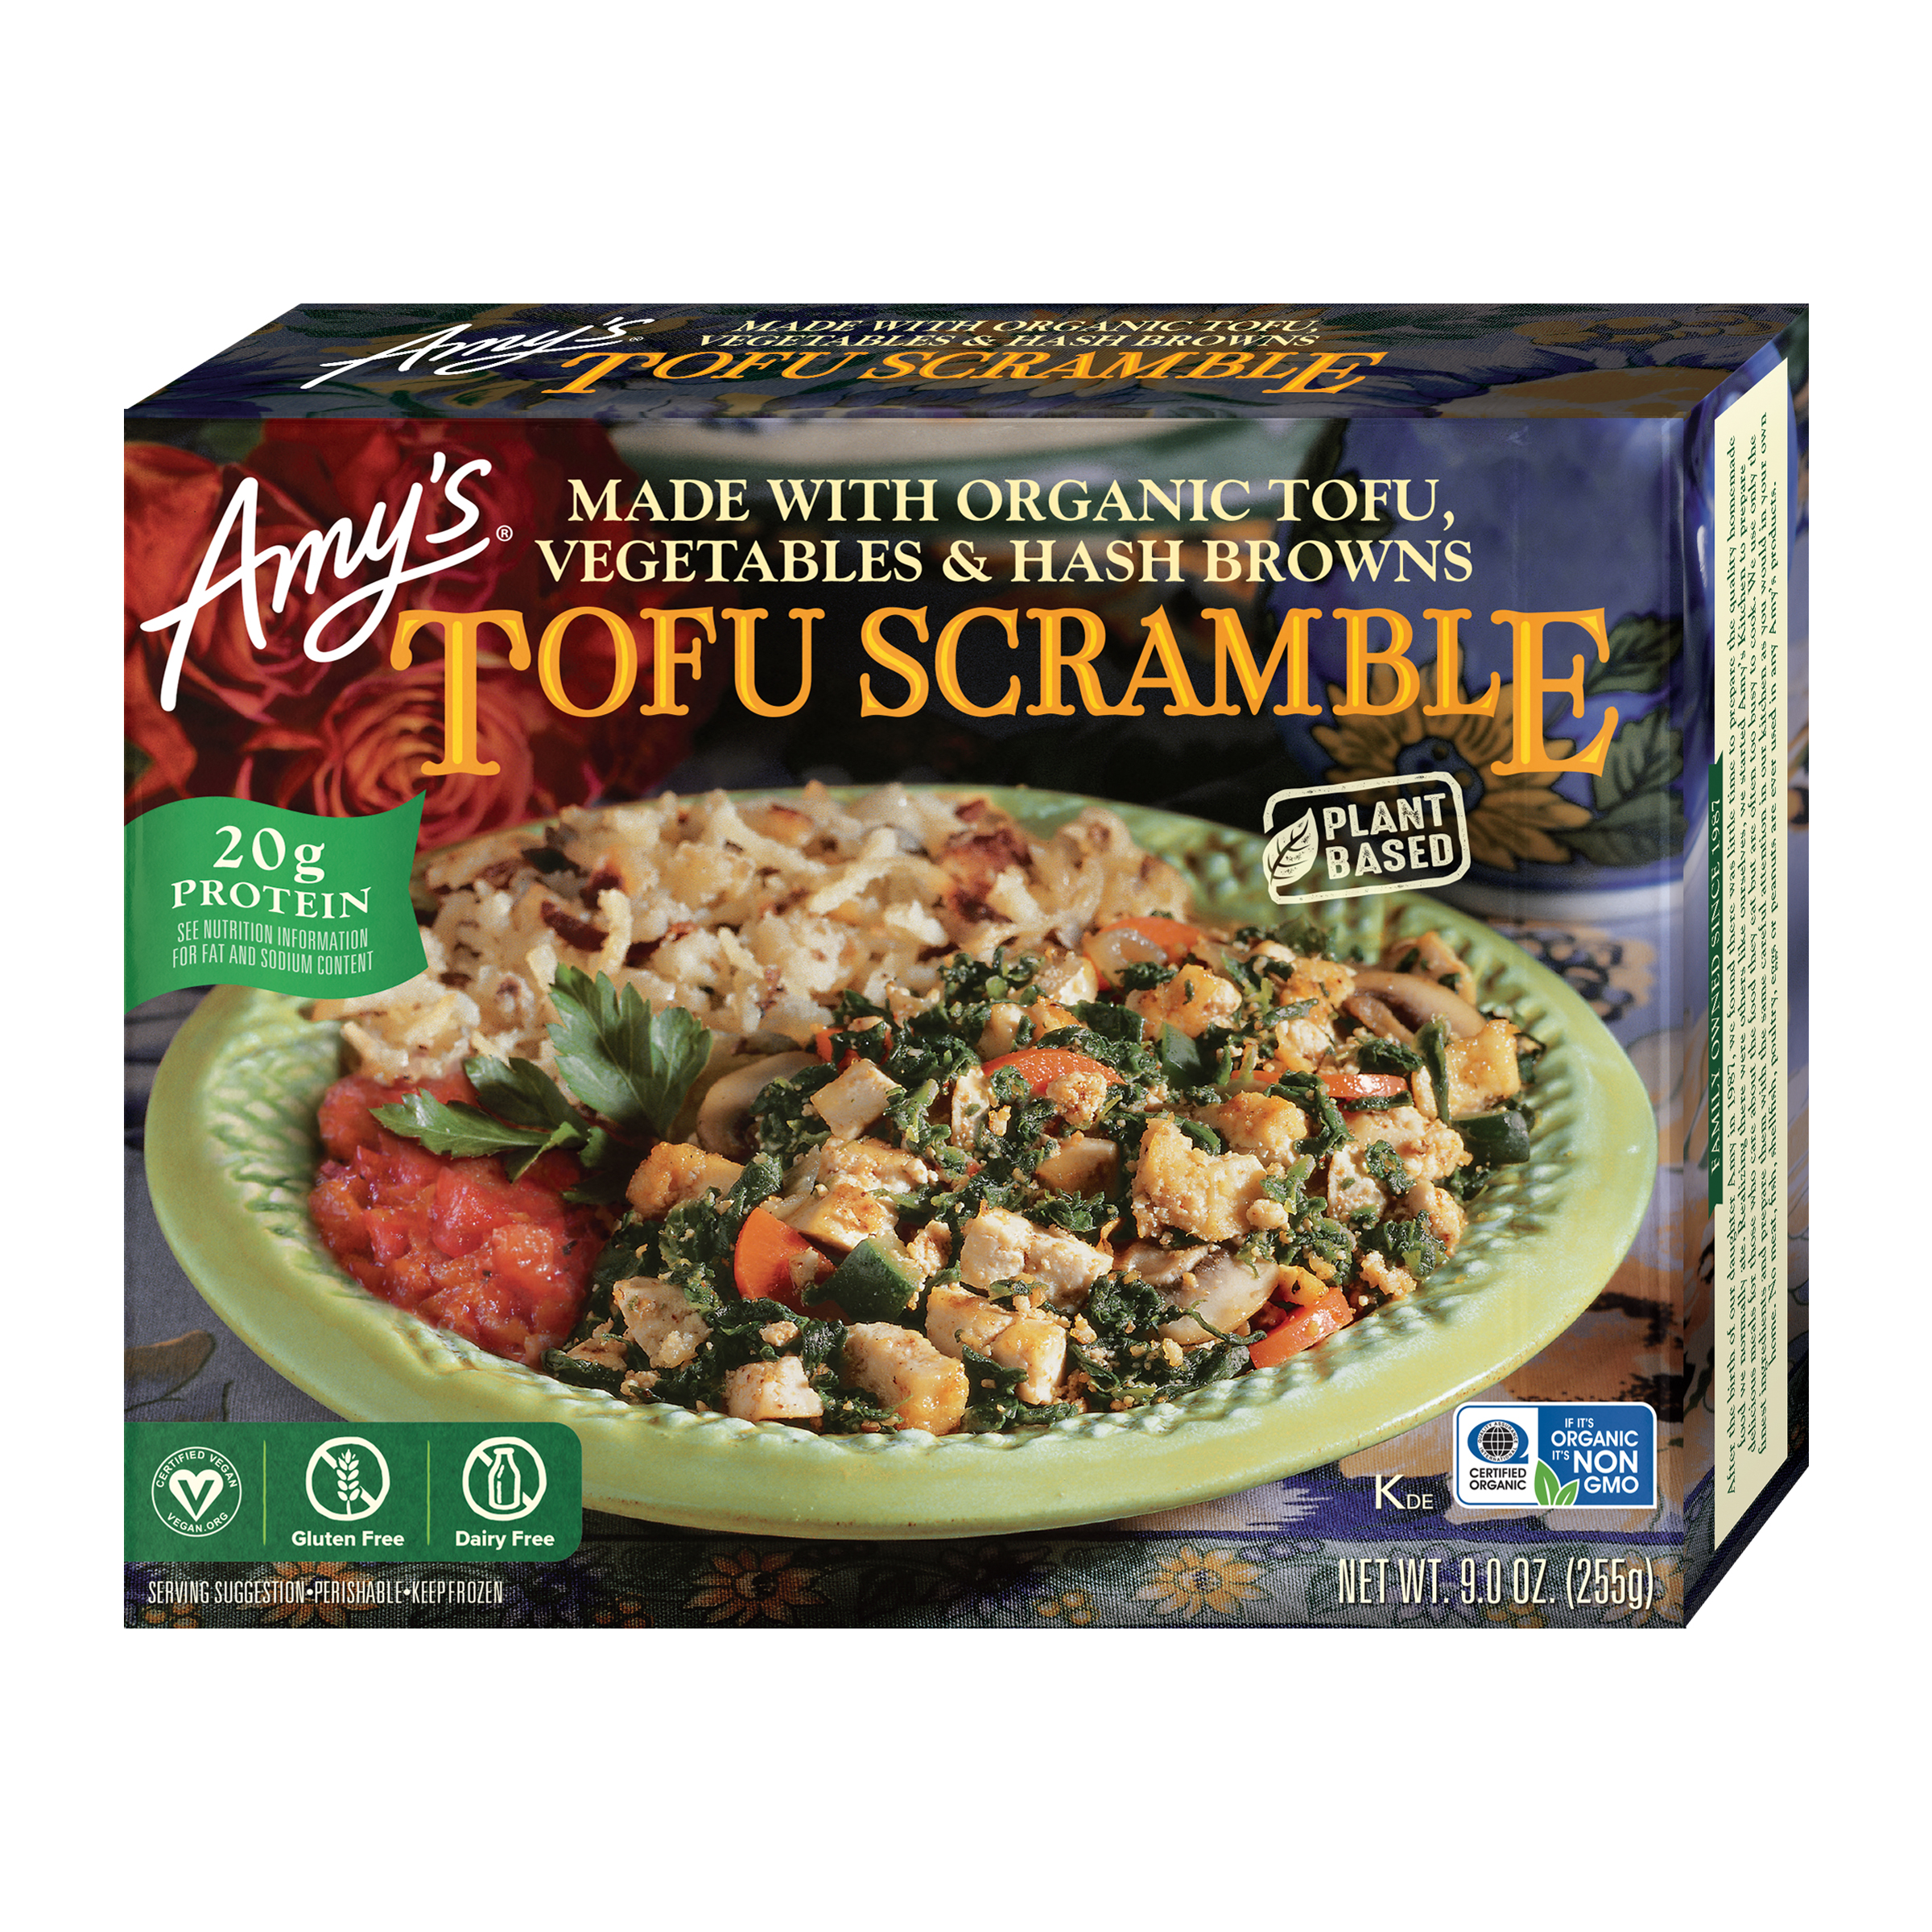 Amy’s Kitchen Frozen Meals, Tofu Scramble, Plant-Based Microwave Meal, 9 oz - image 1 of 7